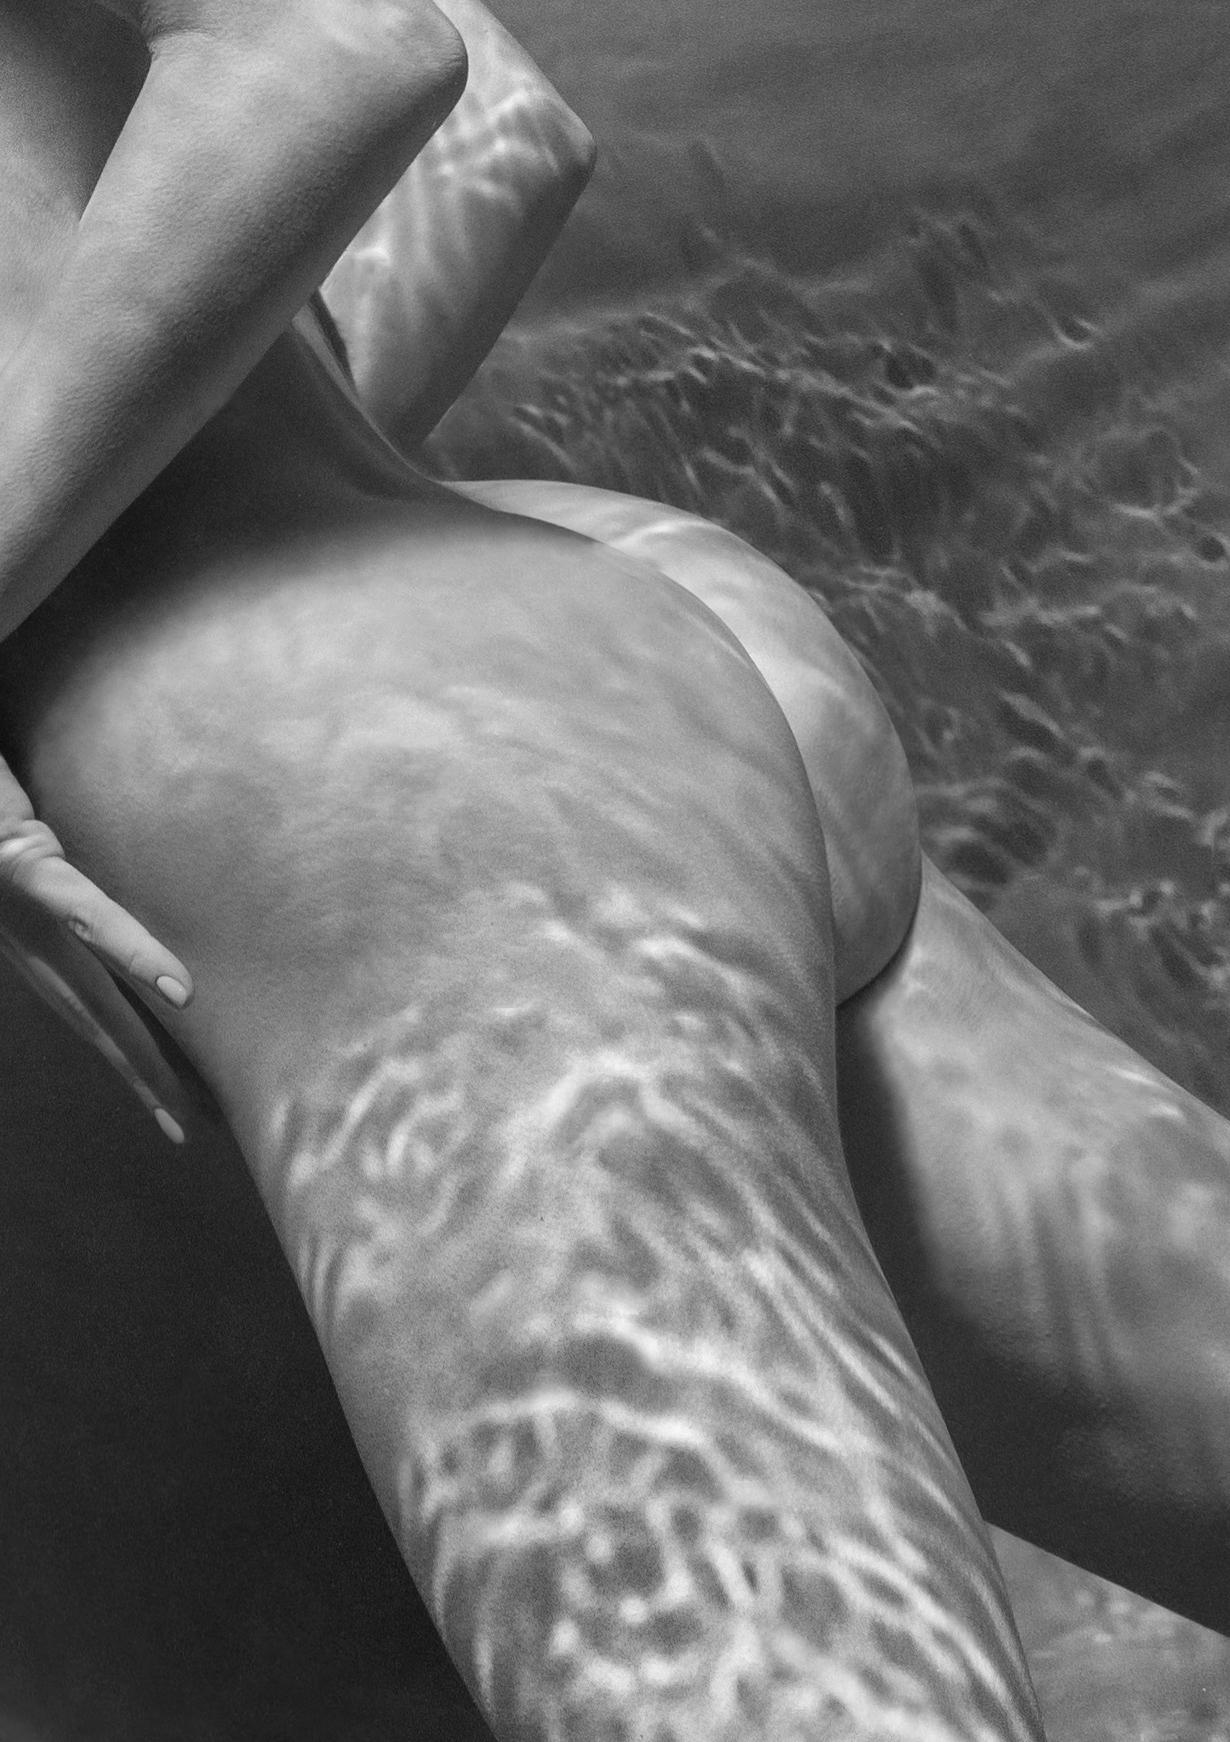 Eyes and Stripes - underwater b&w nude photograph archival pigment print 35